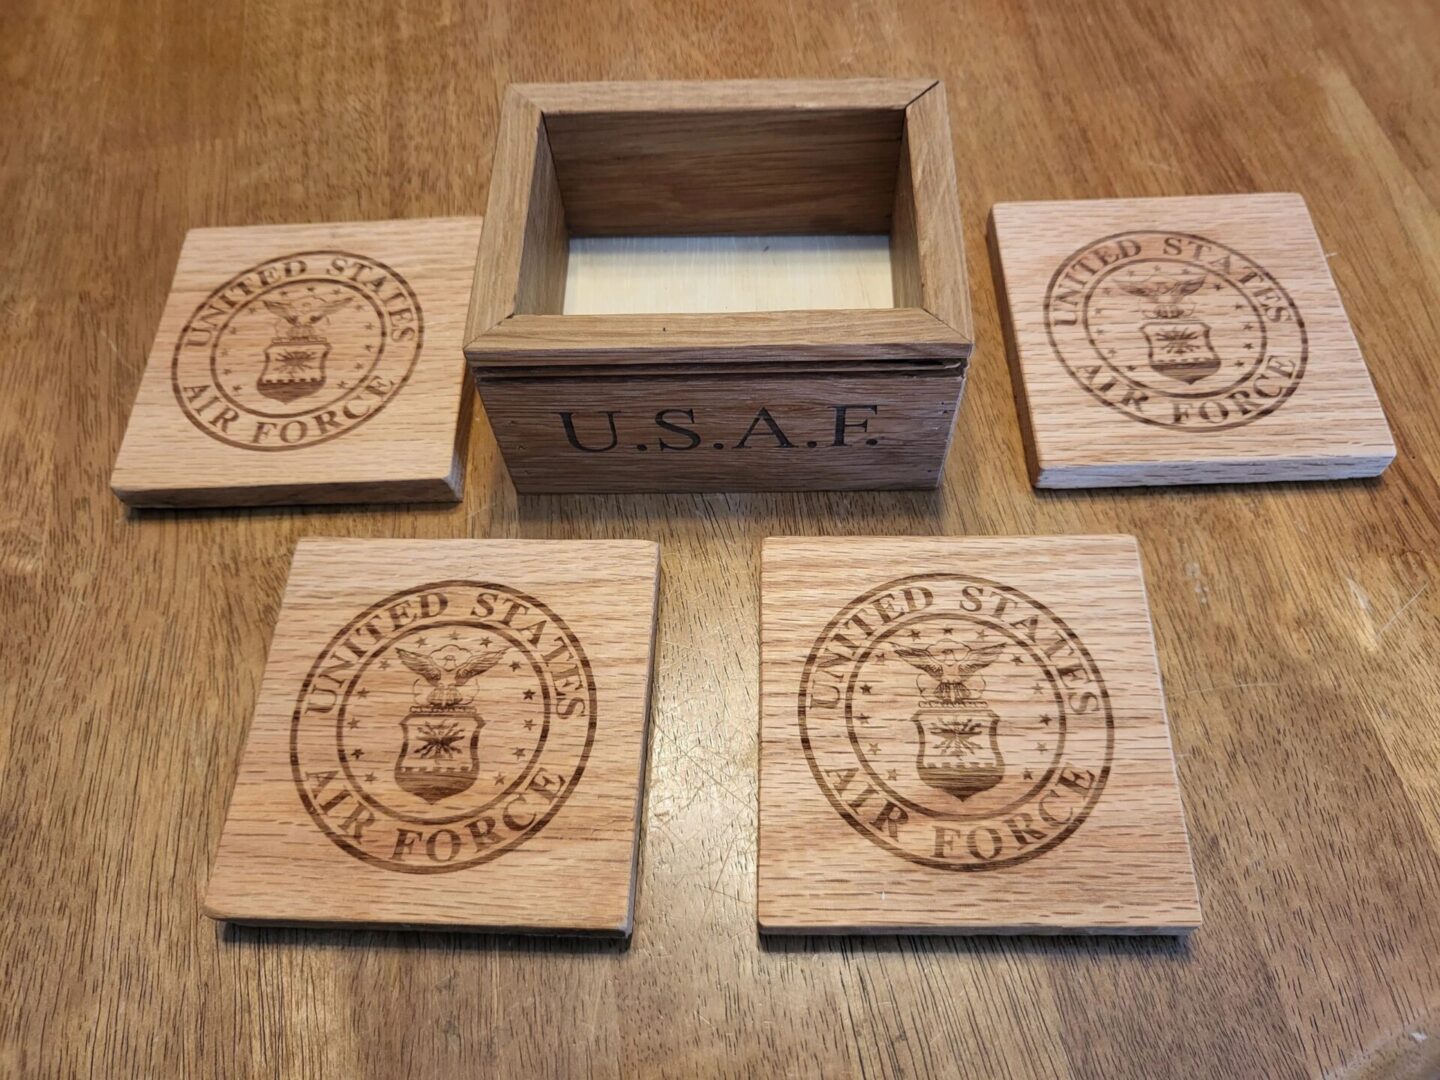 US Air Force wooden plates